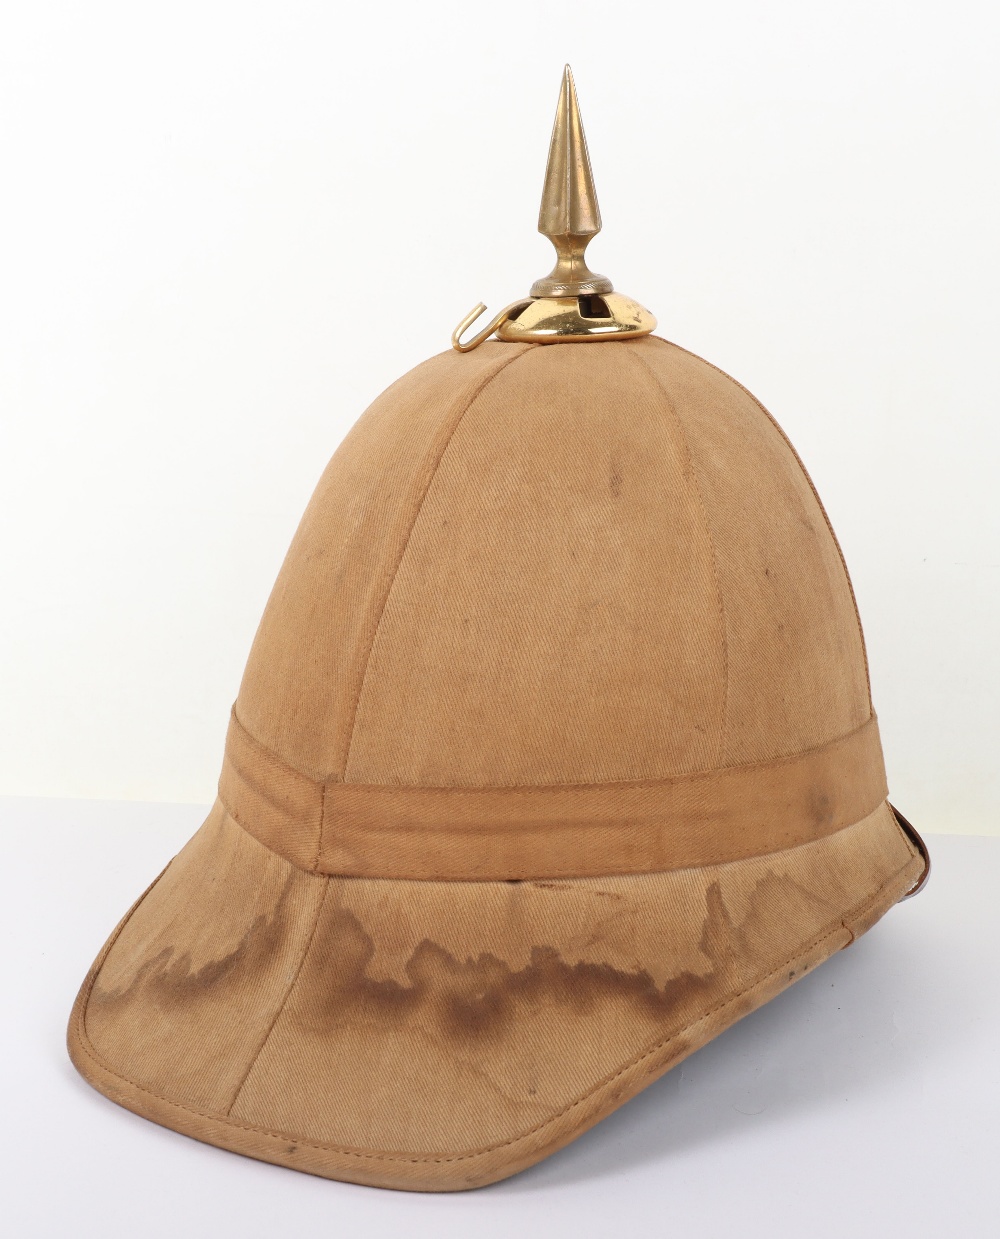 American Military Foreign Service Helmet c1900 - Image 3 of 8